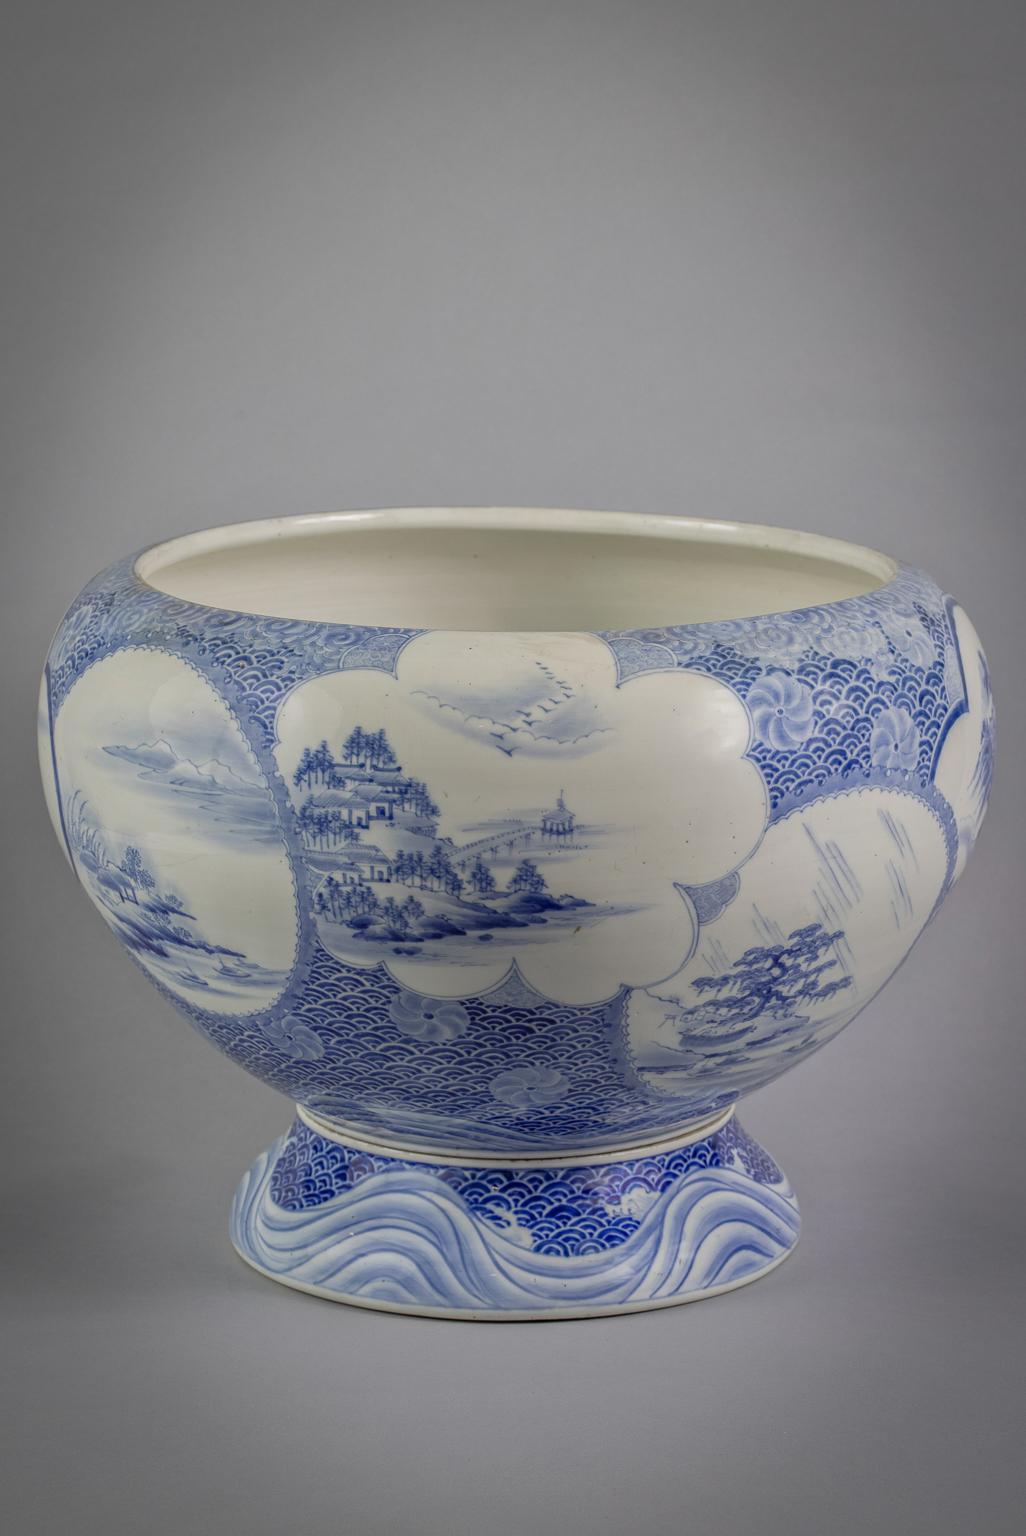 Japanese porcelain blue and white fish jardiniere on stand, circa 1890.